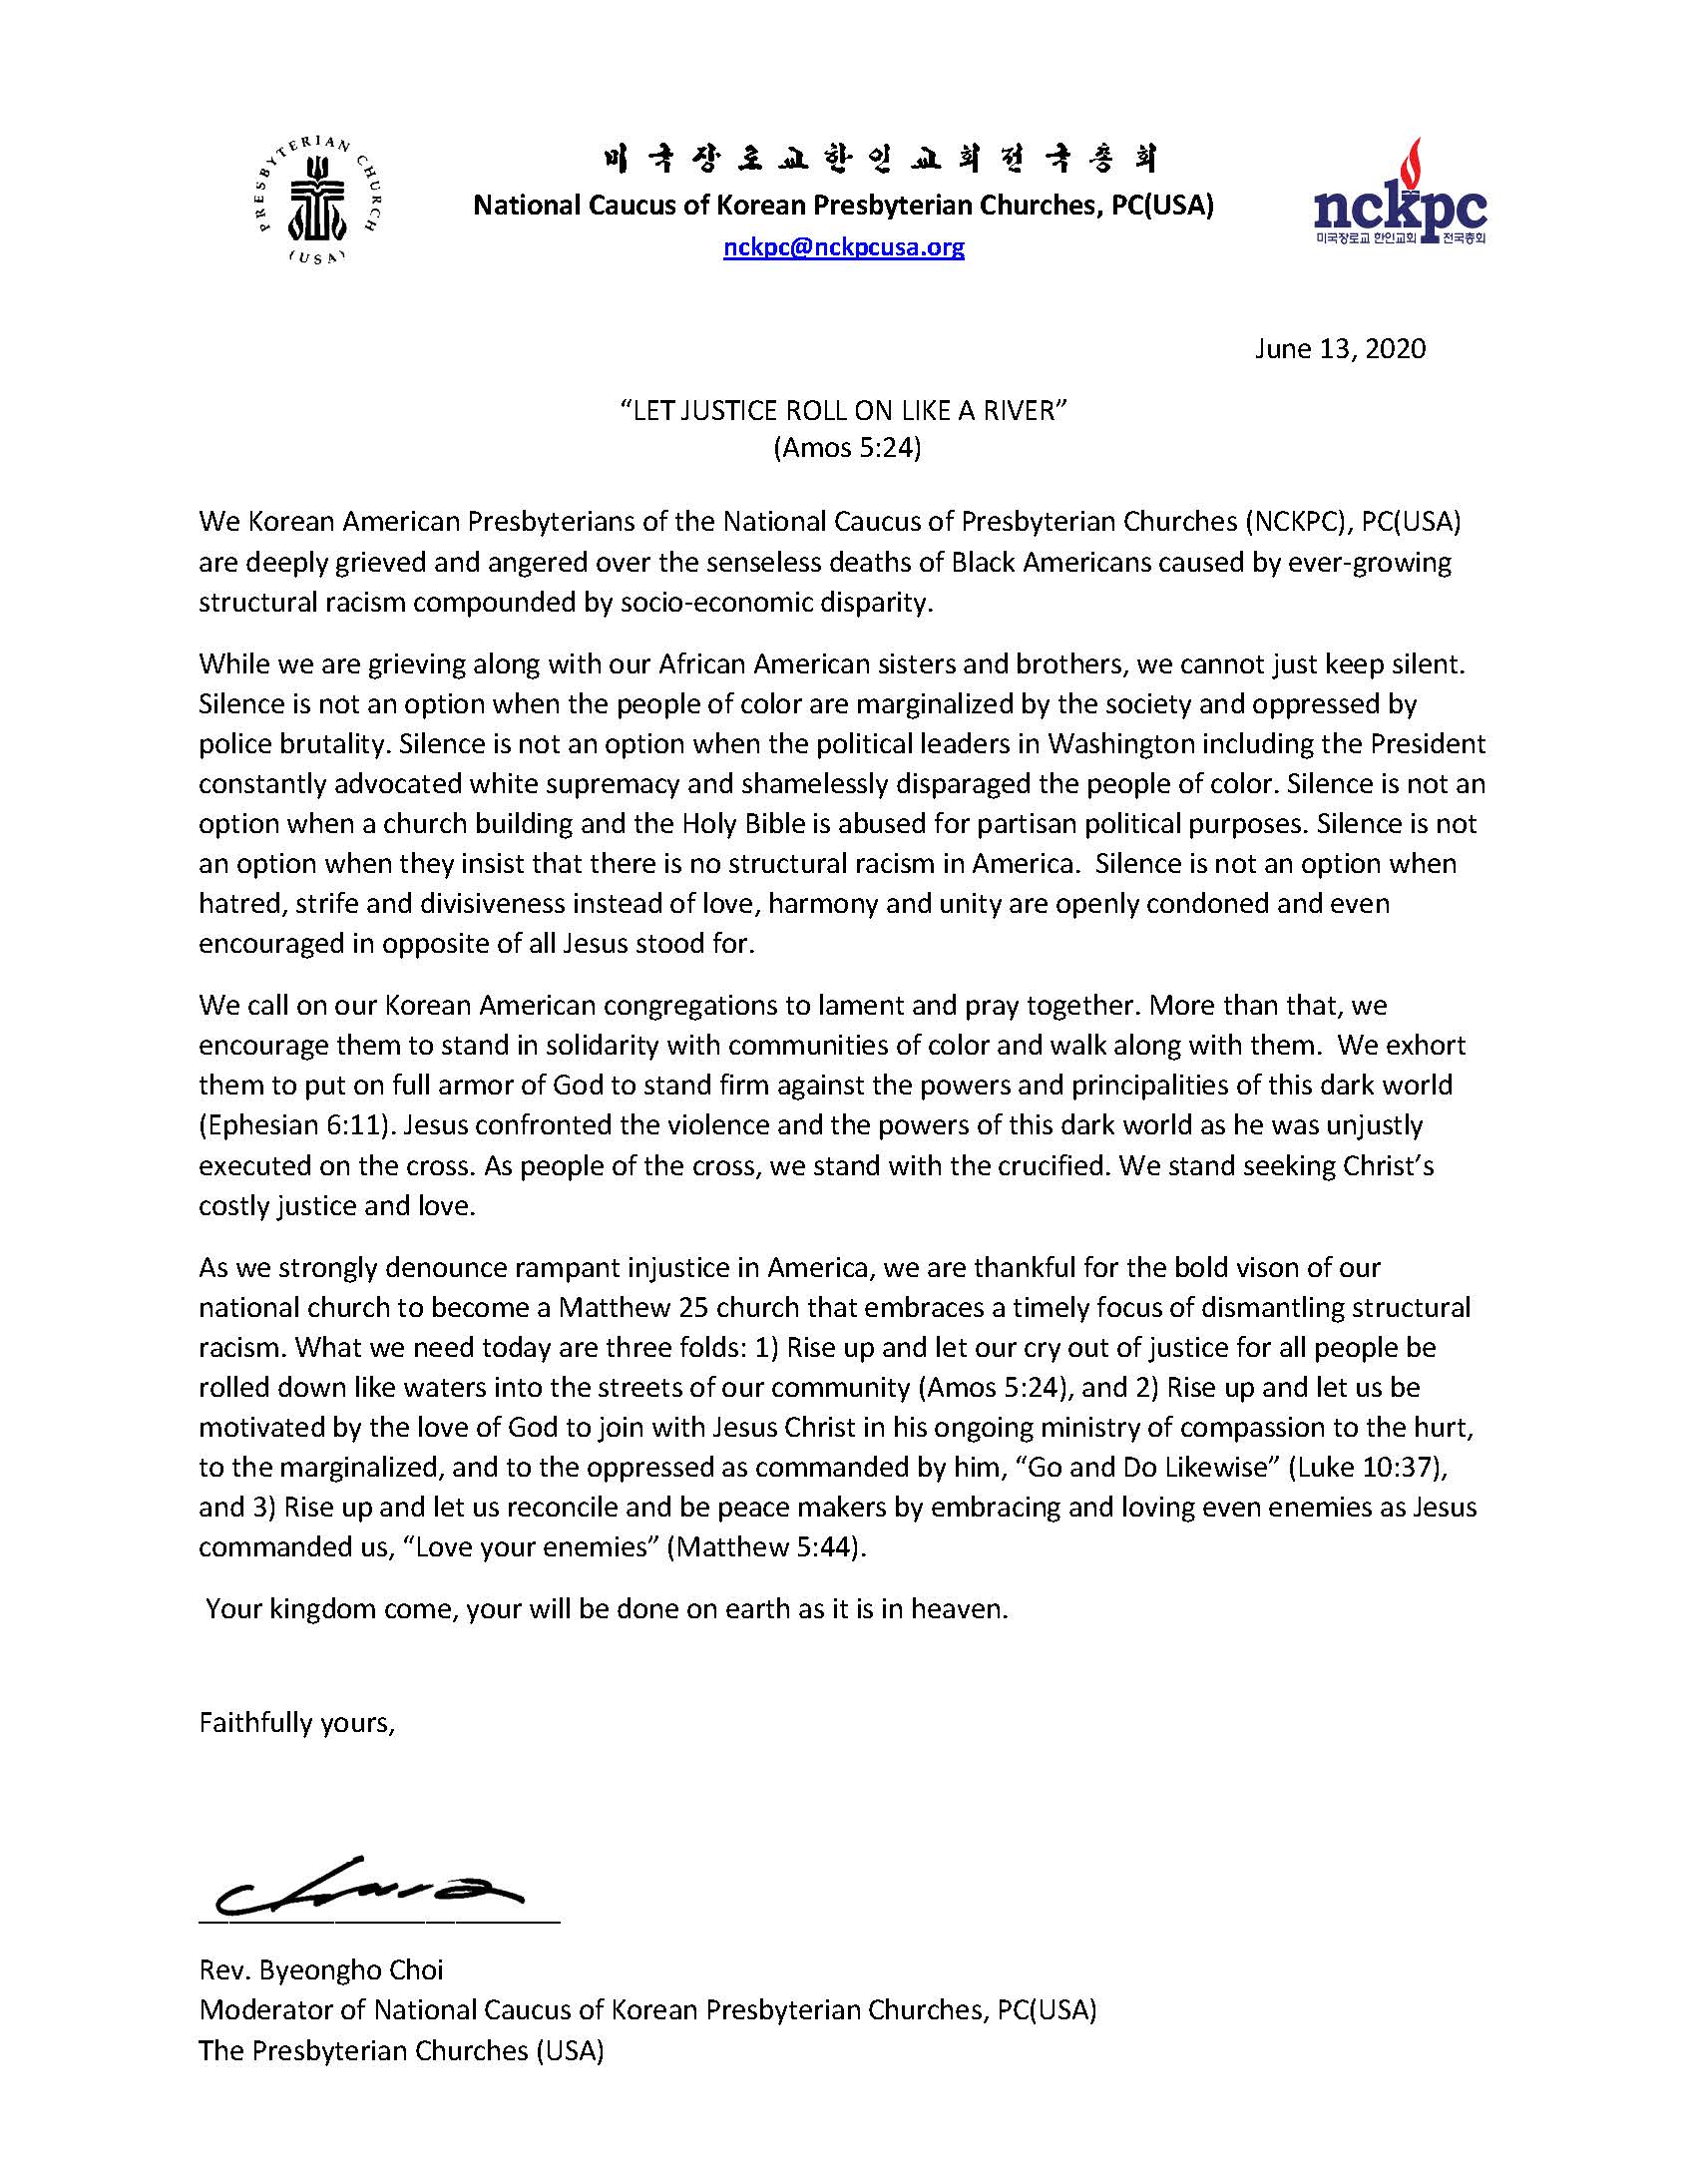 Letter to the PC(USA) leaders_Page_1.jpg